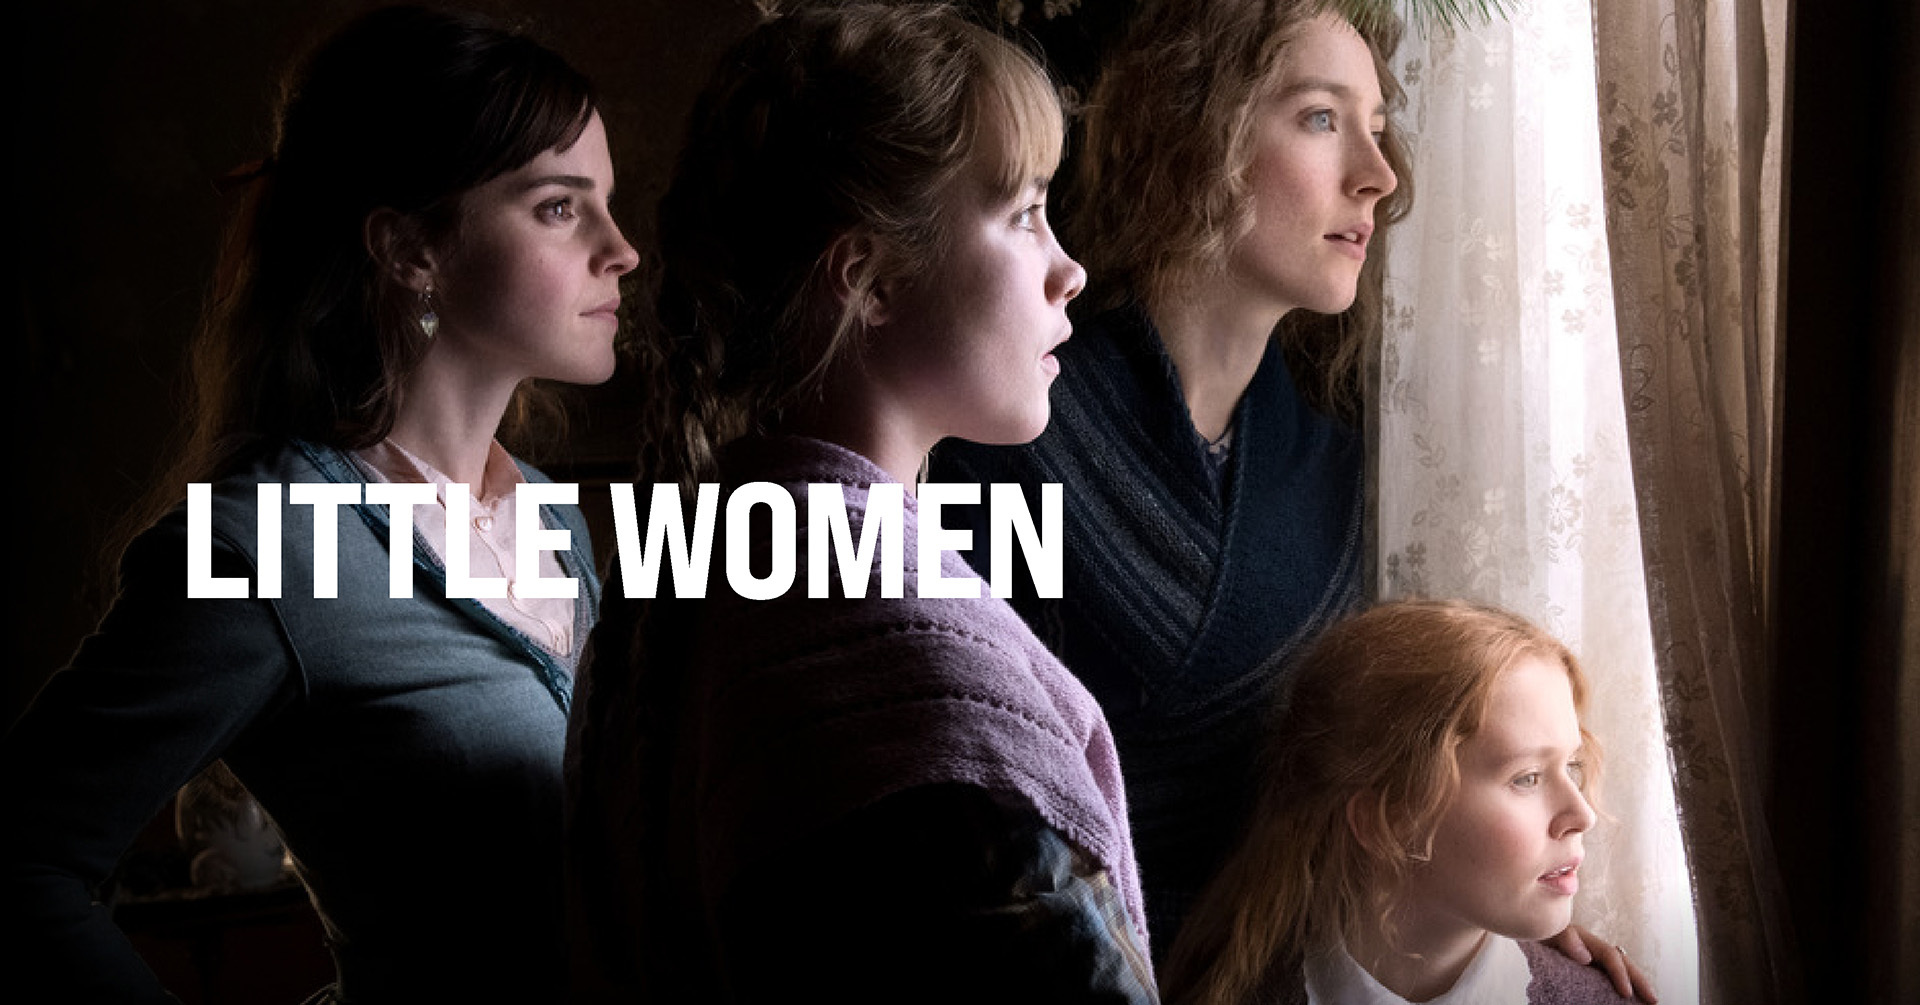 34-facts-about-the-movie-little-women